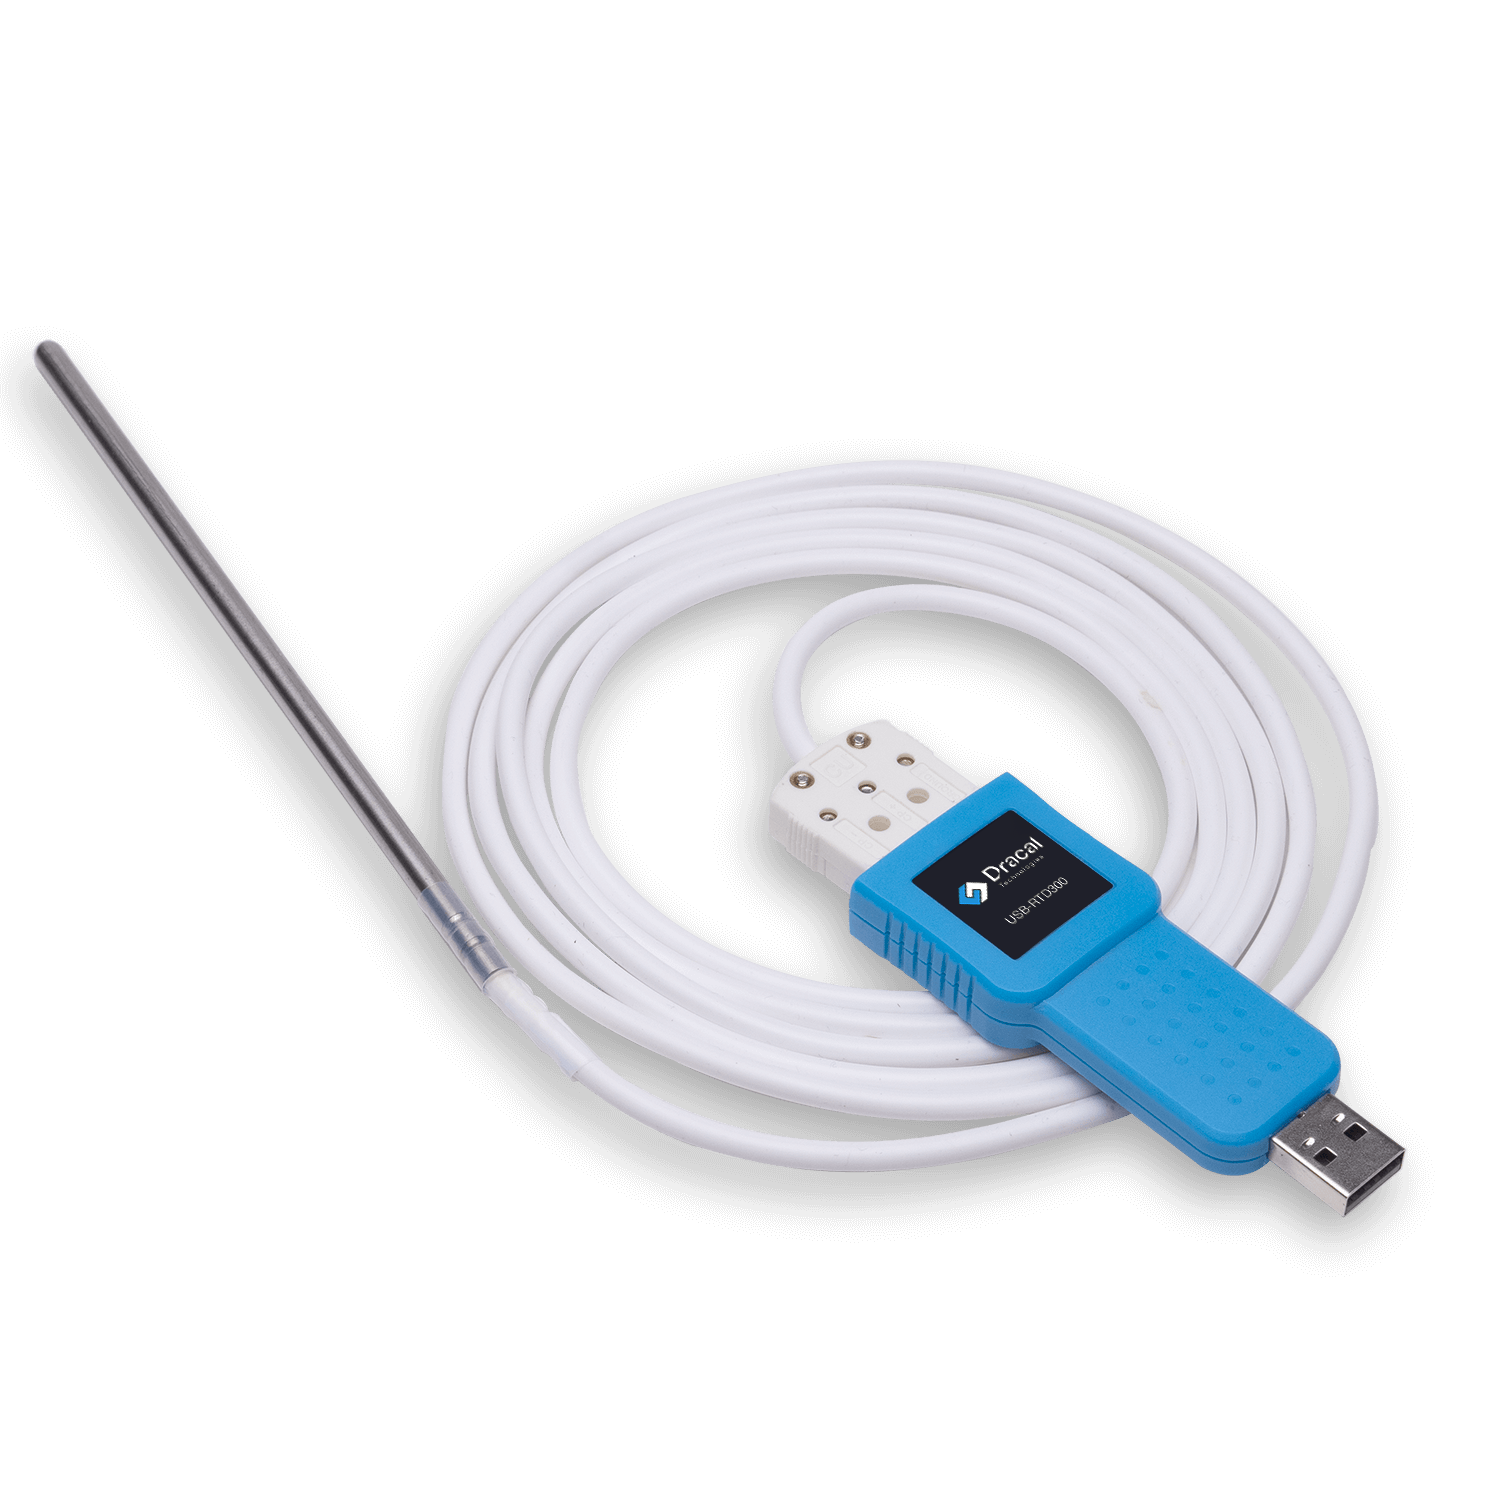 RTD300: USB adapter for any Pt-100 RTD probe for temperature measurement - With Pt100 probe